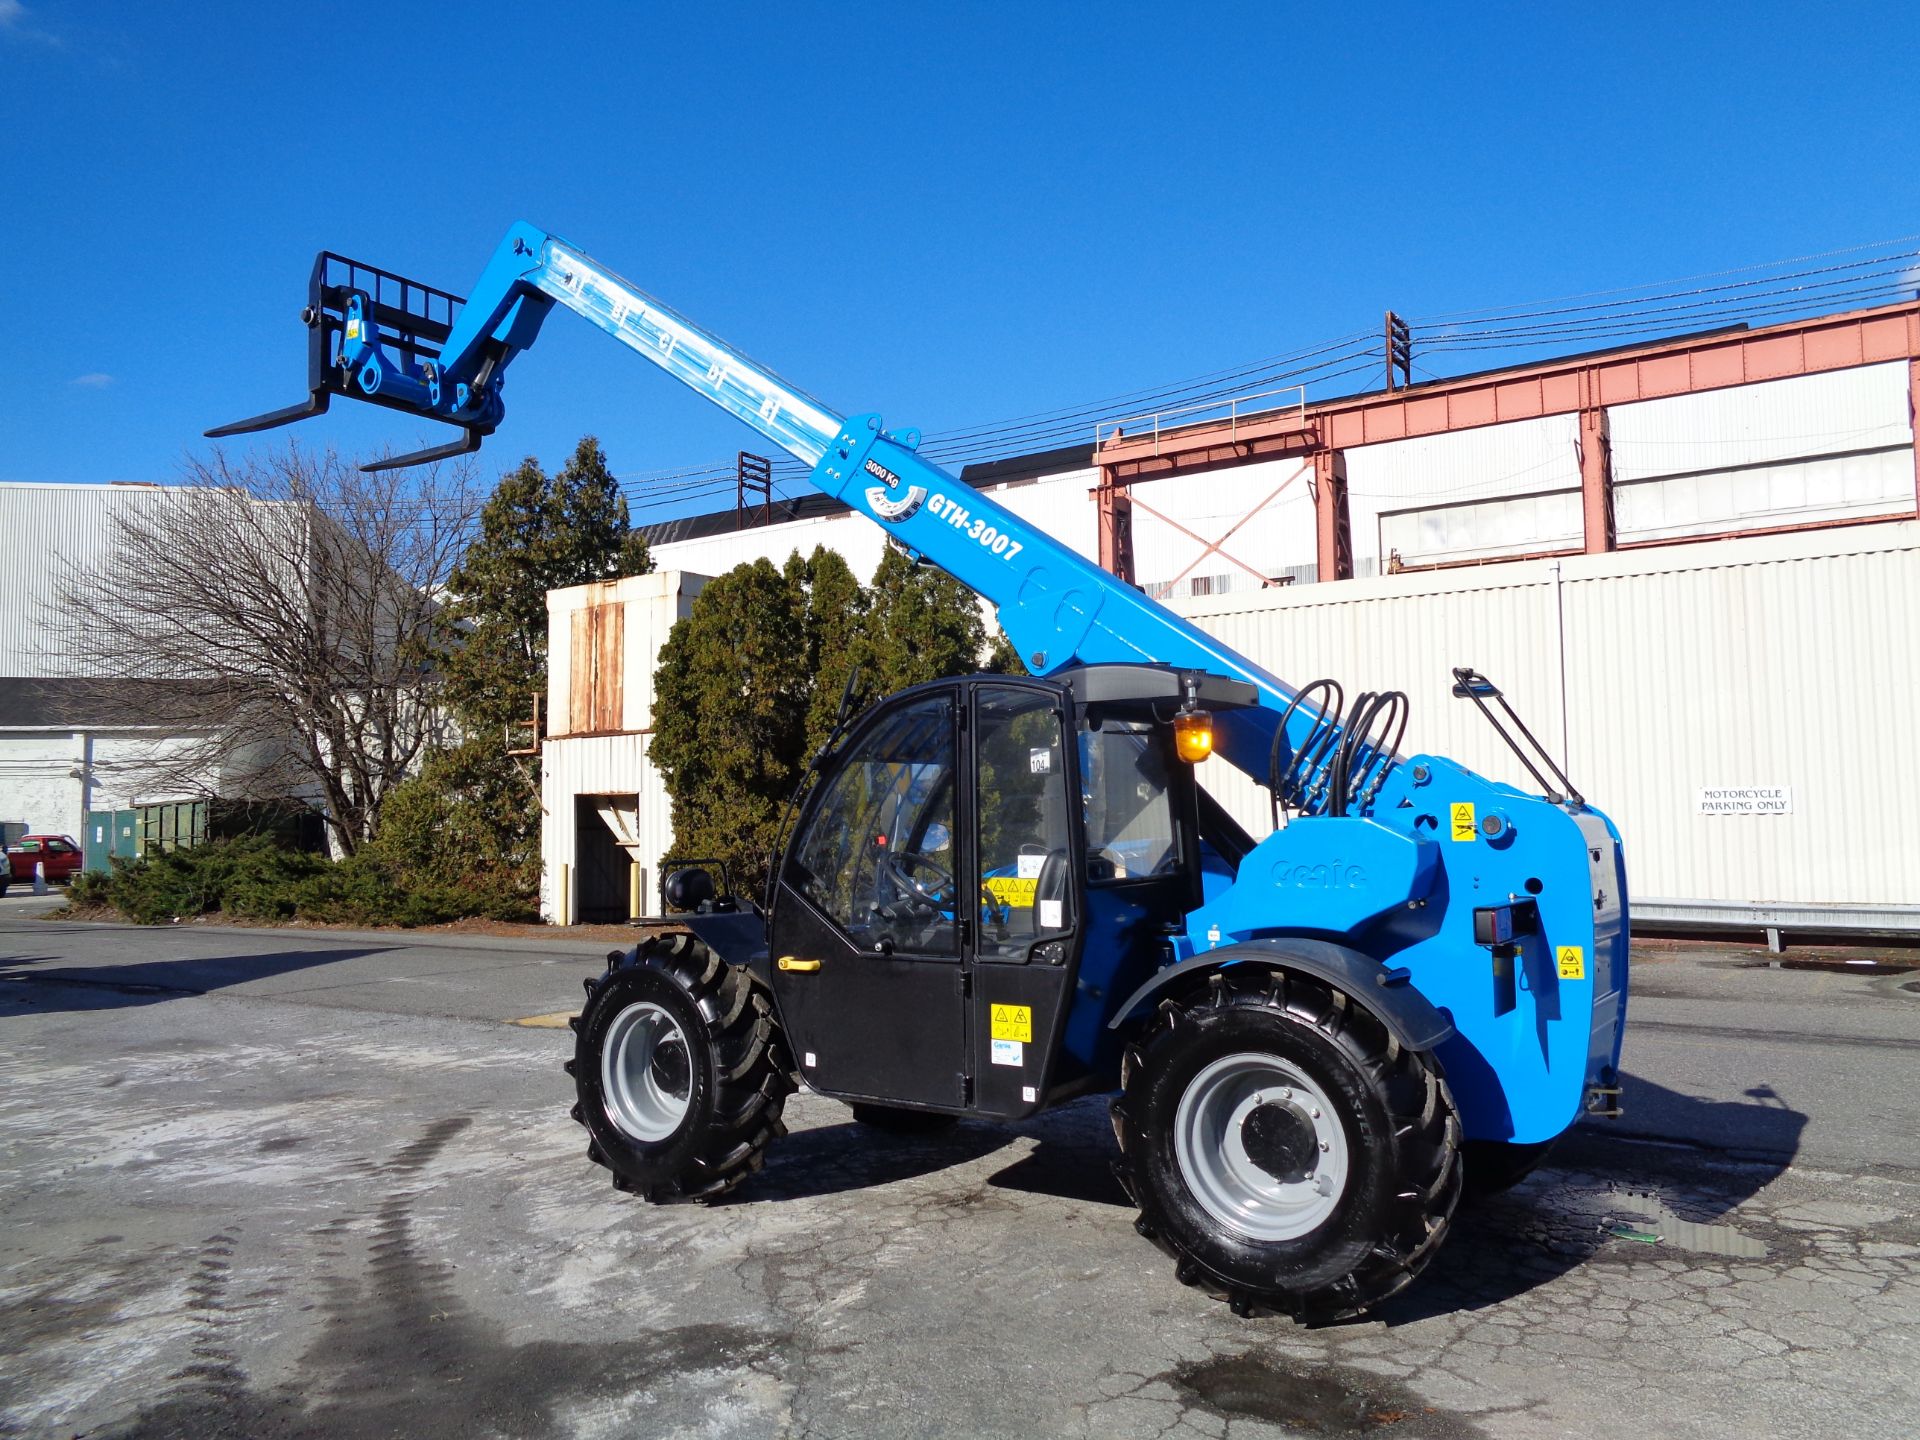 New Unused 2018 Genie GTH3007 Telescopic Forklift 6,600 lbs - Enclosed Cab - Image 10 of 23